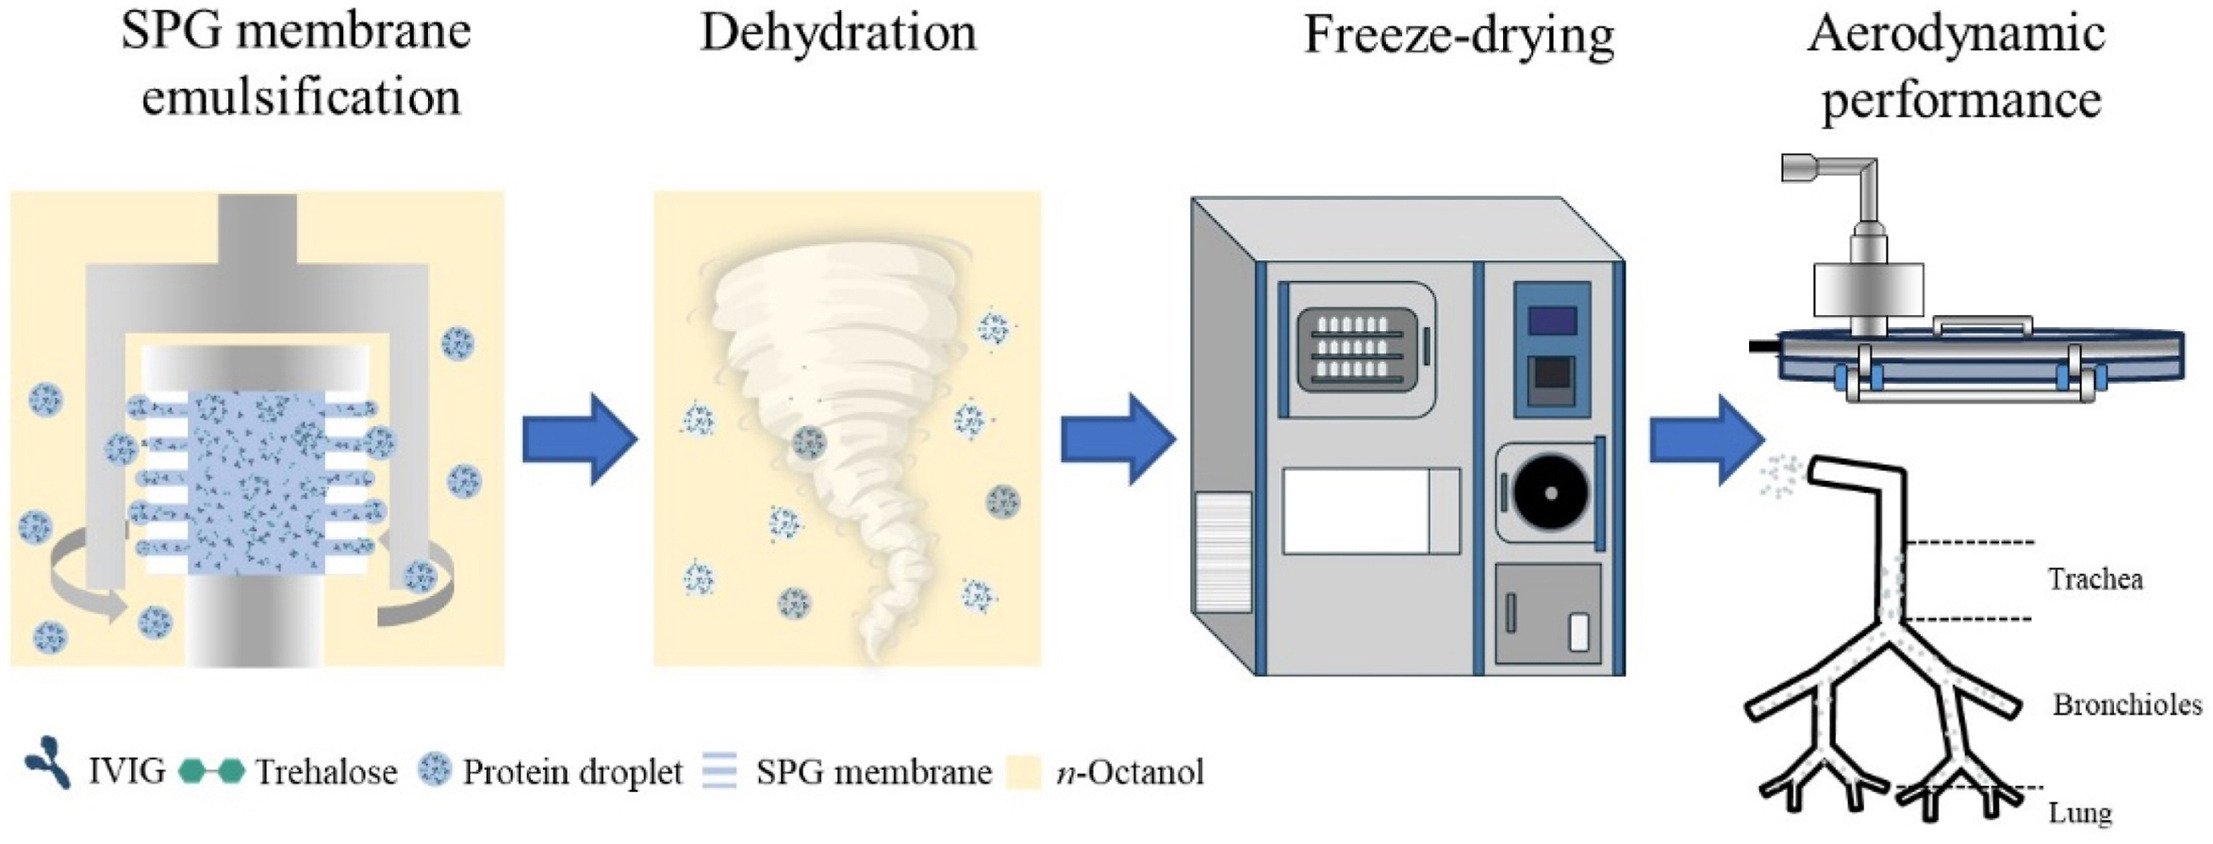 Preparation of antibody-loaded protein microbeads for pulmonary delivery via Shirasu porous glass membrane emulsification and freeze drying